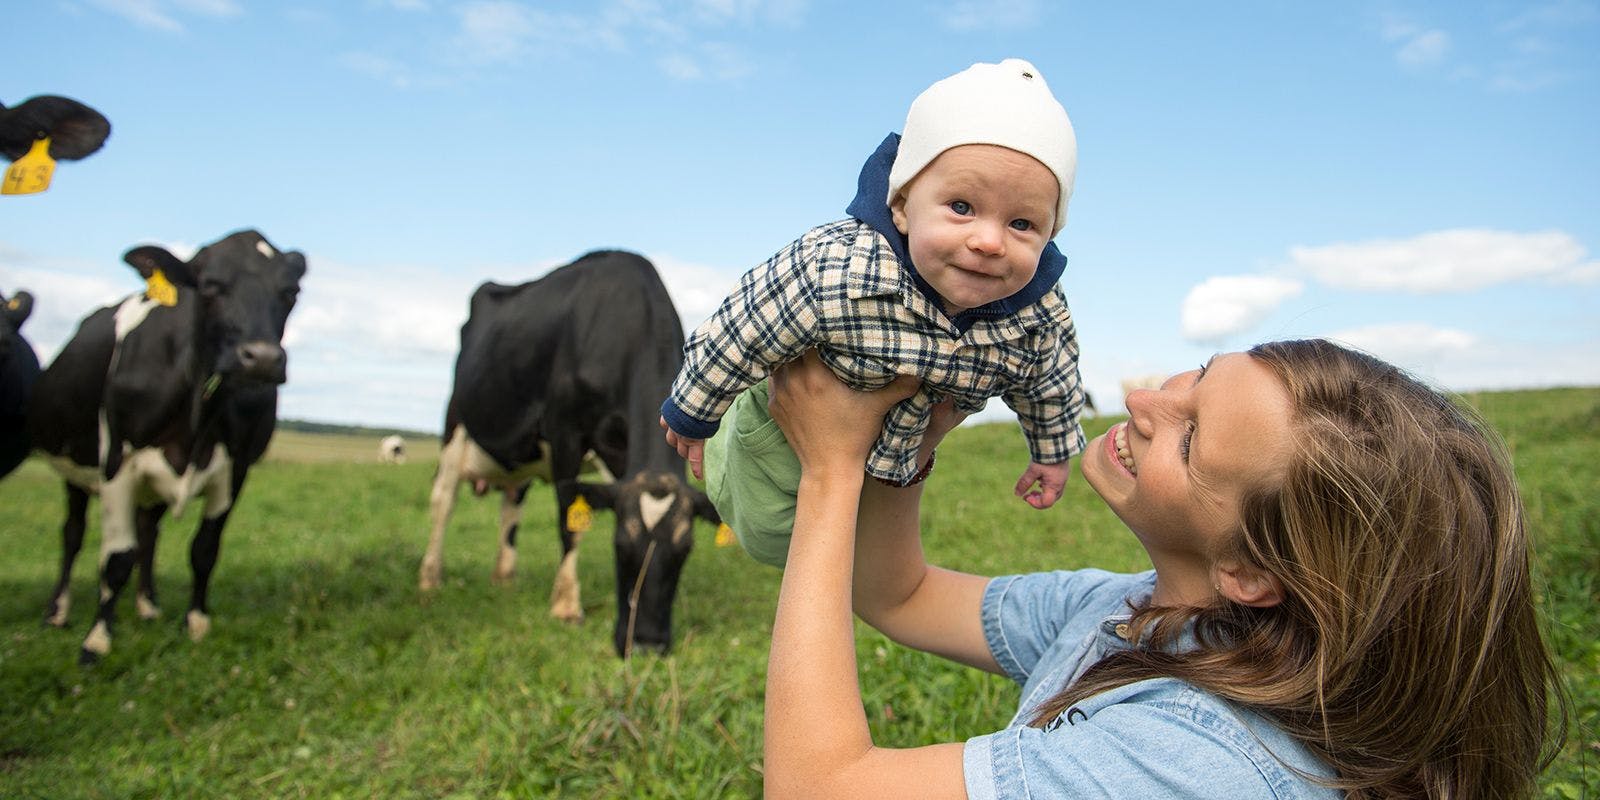 In a pasture with cows in the background, Carrie O’Reilly holds her baby over her head and smiles.